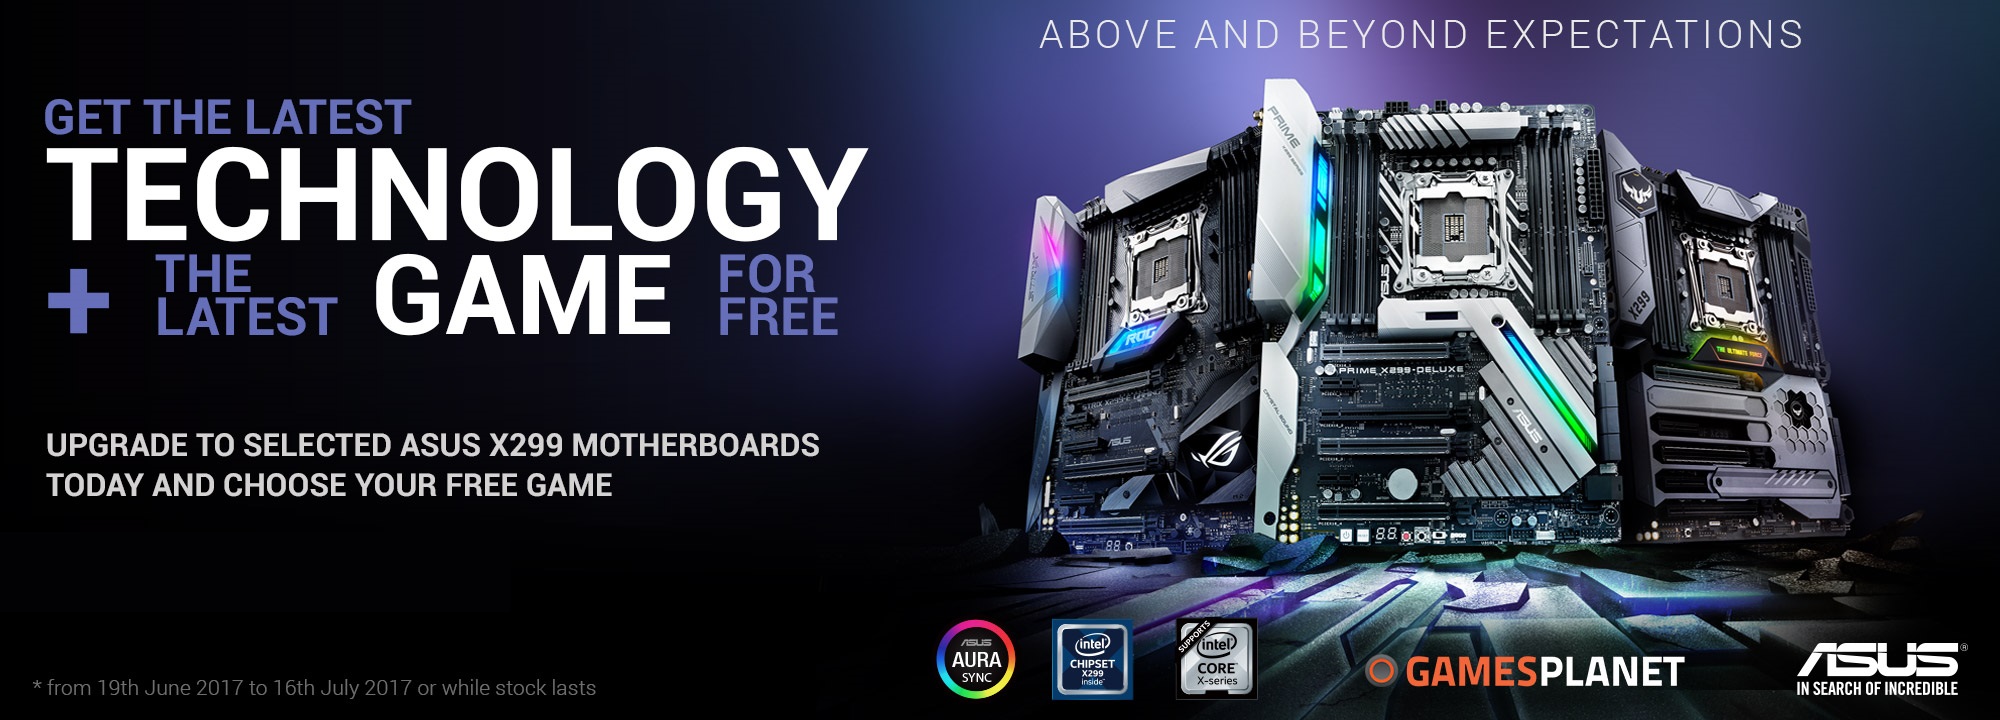 ASUS ROG Announces Free AAA Game with X299 Purchases